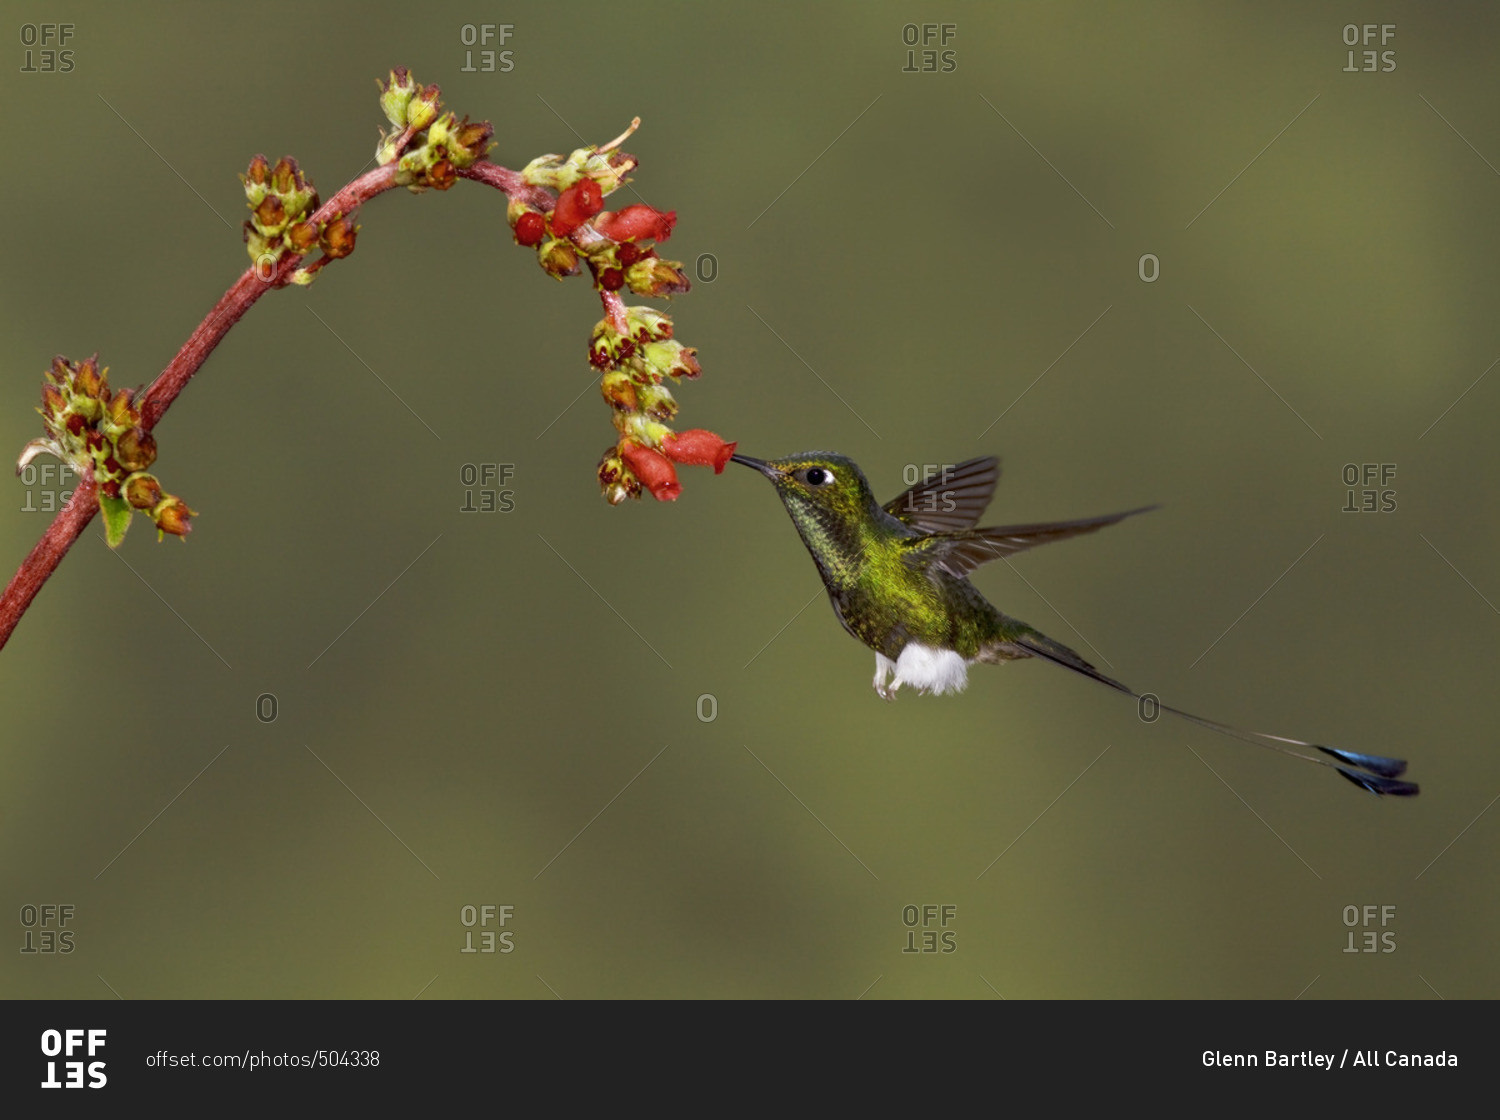 Booted Racket-tail hummingbird (Ocreatus underwoodii) feeding at a flower while flying in the Tandayapa Valley of Ecuador